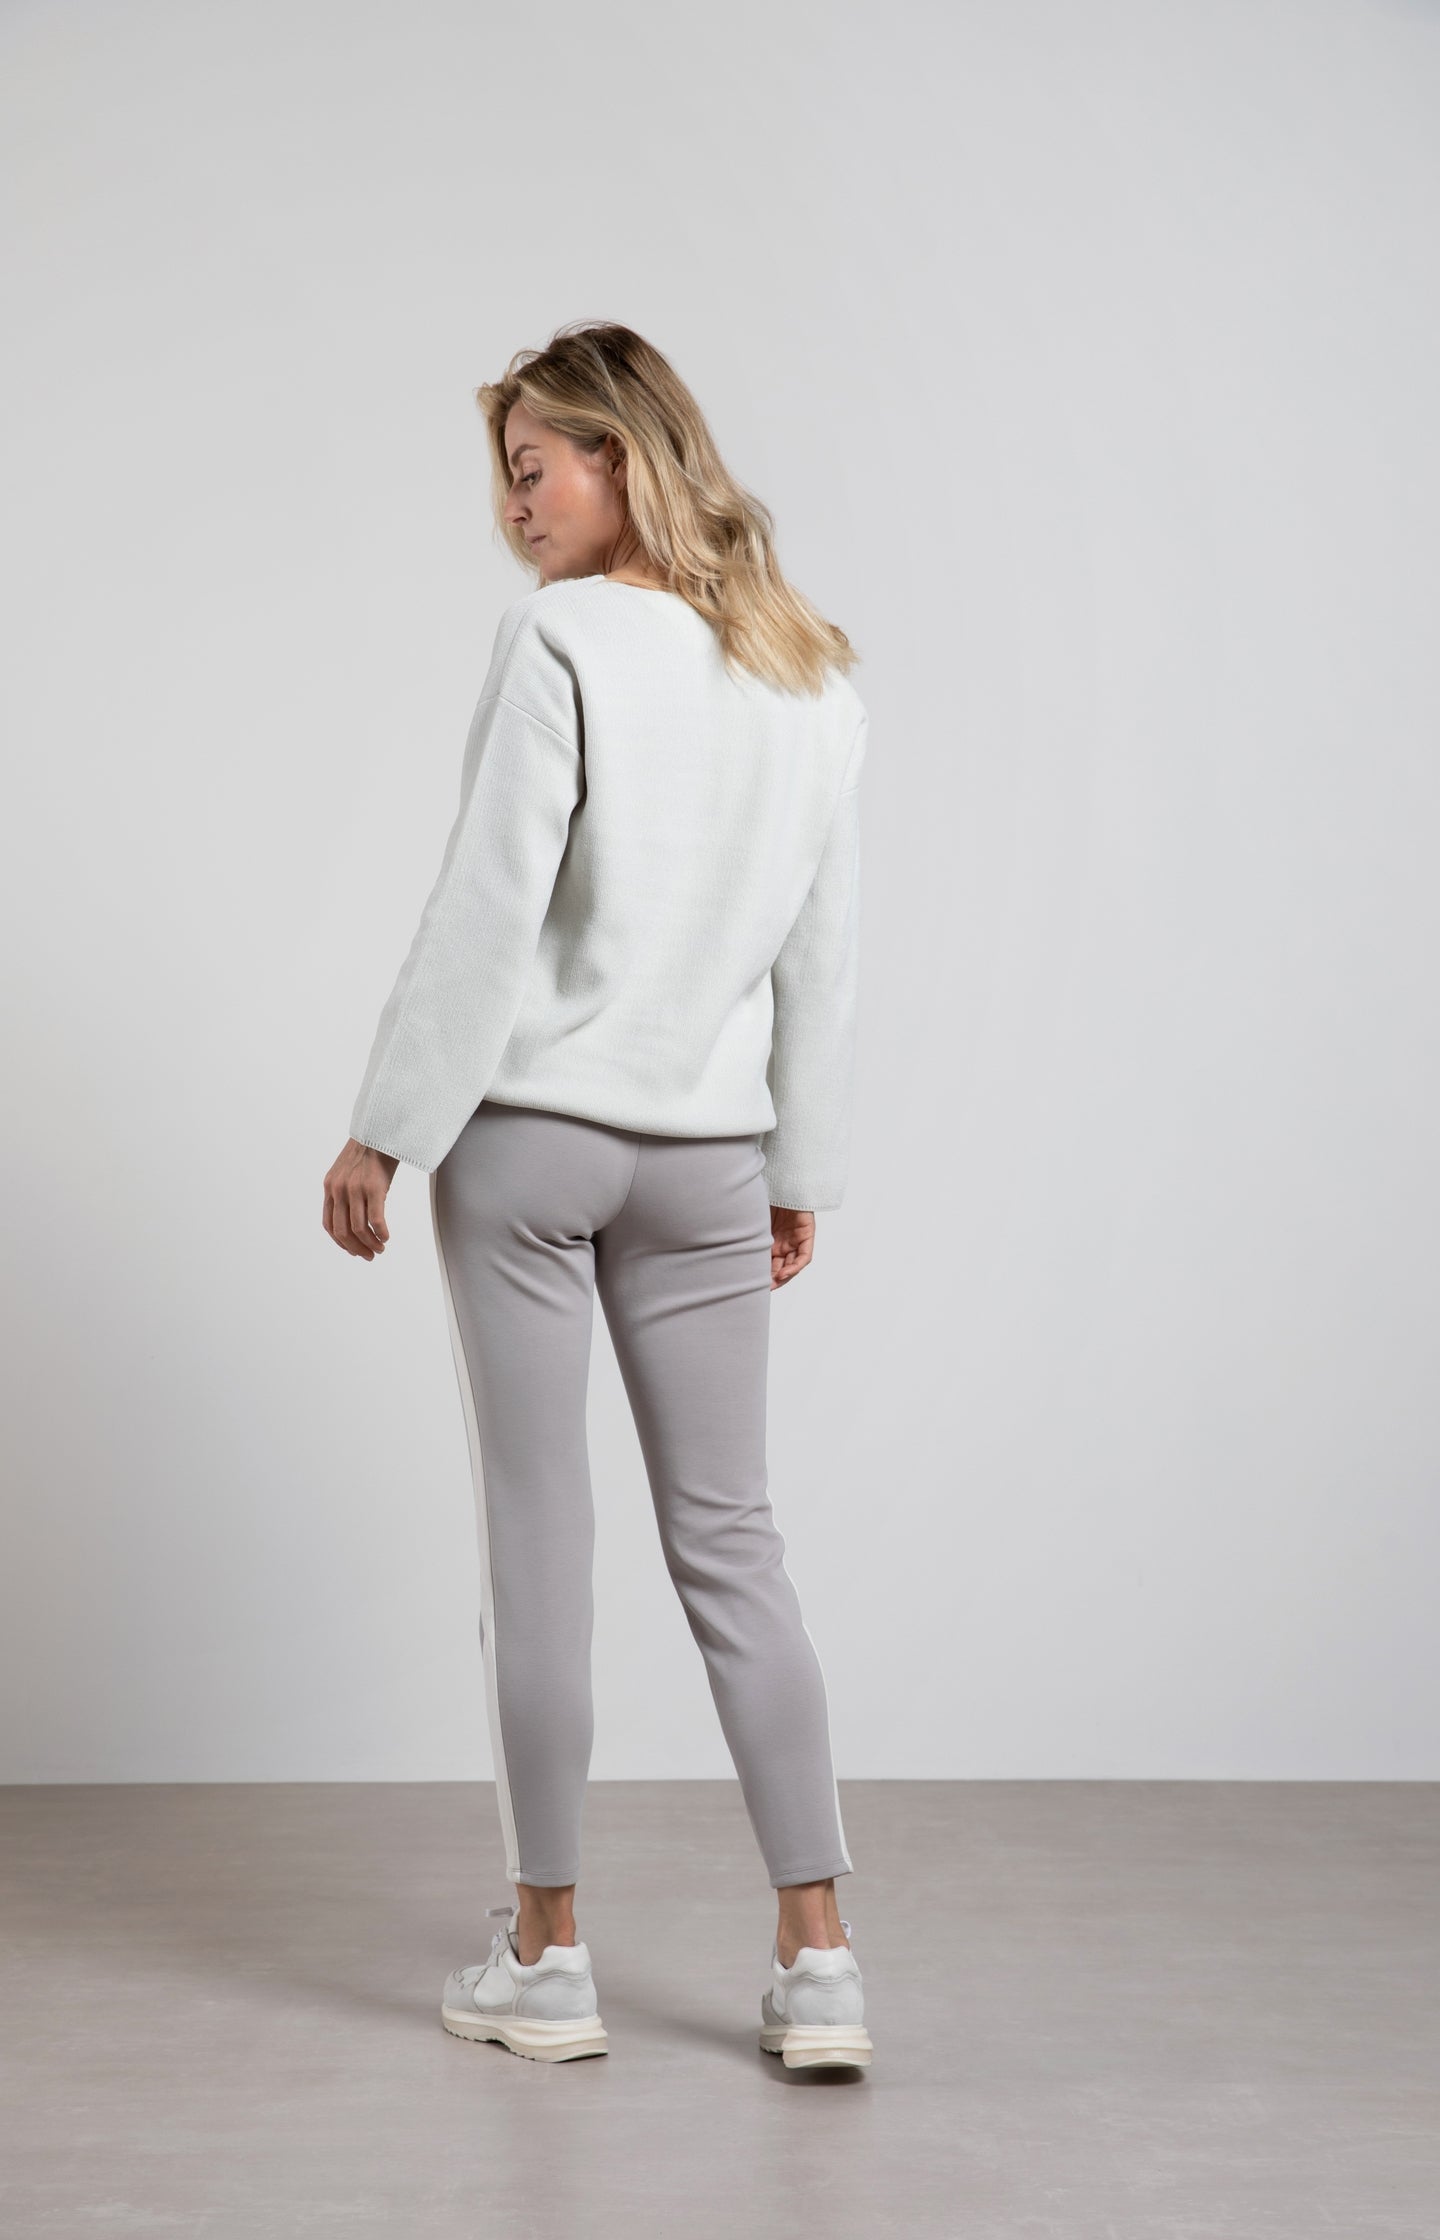 Scuba trousers with side pockets, seam details and stripe